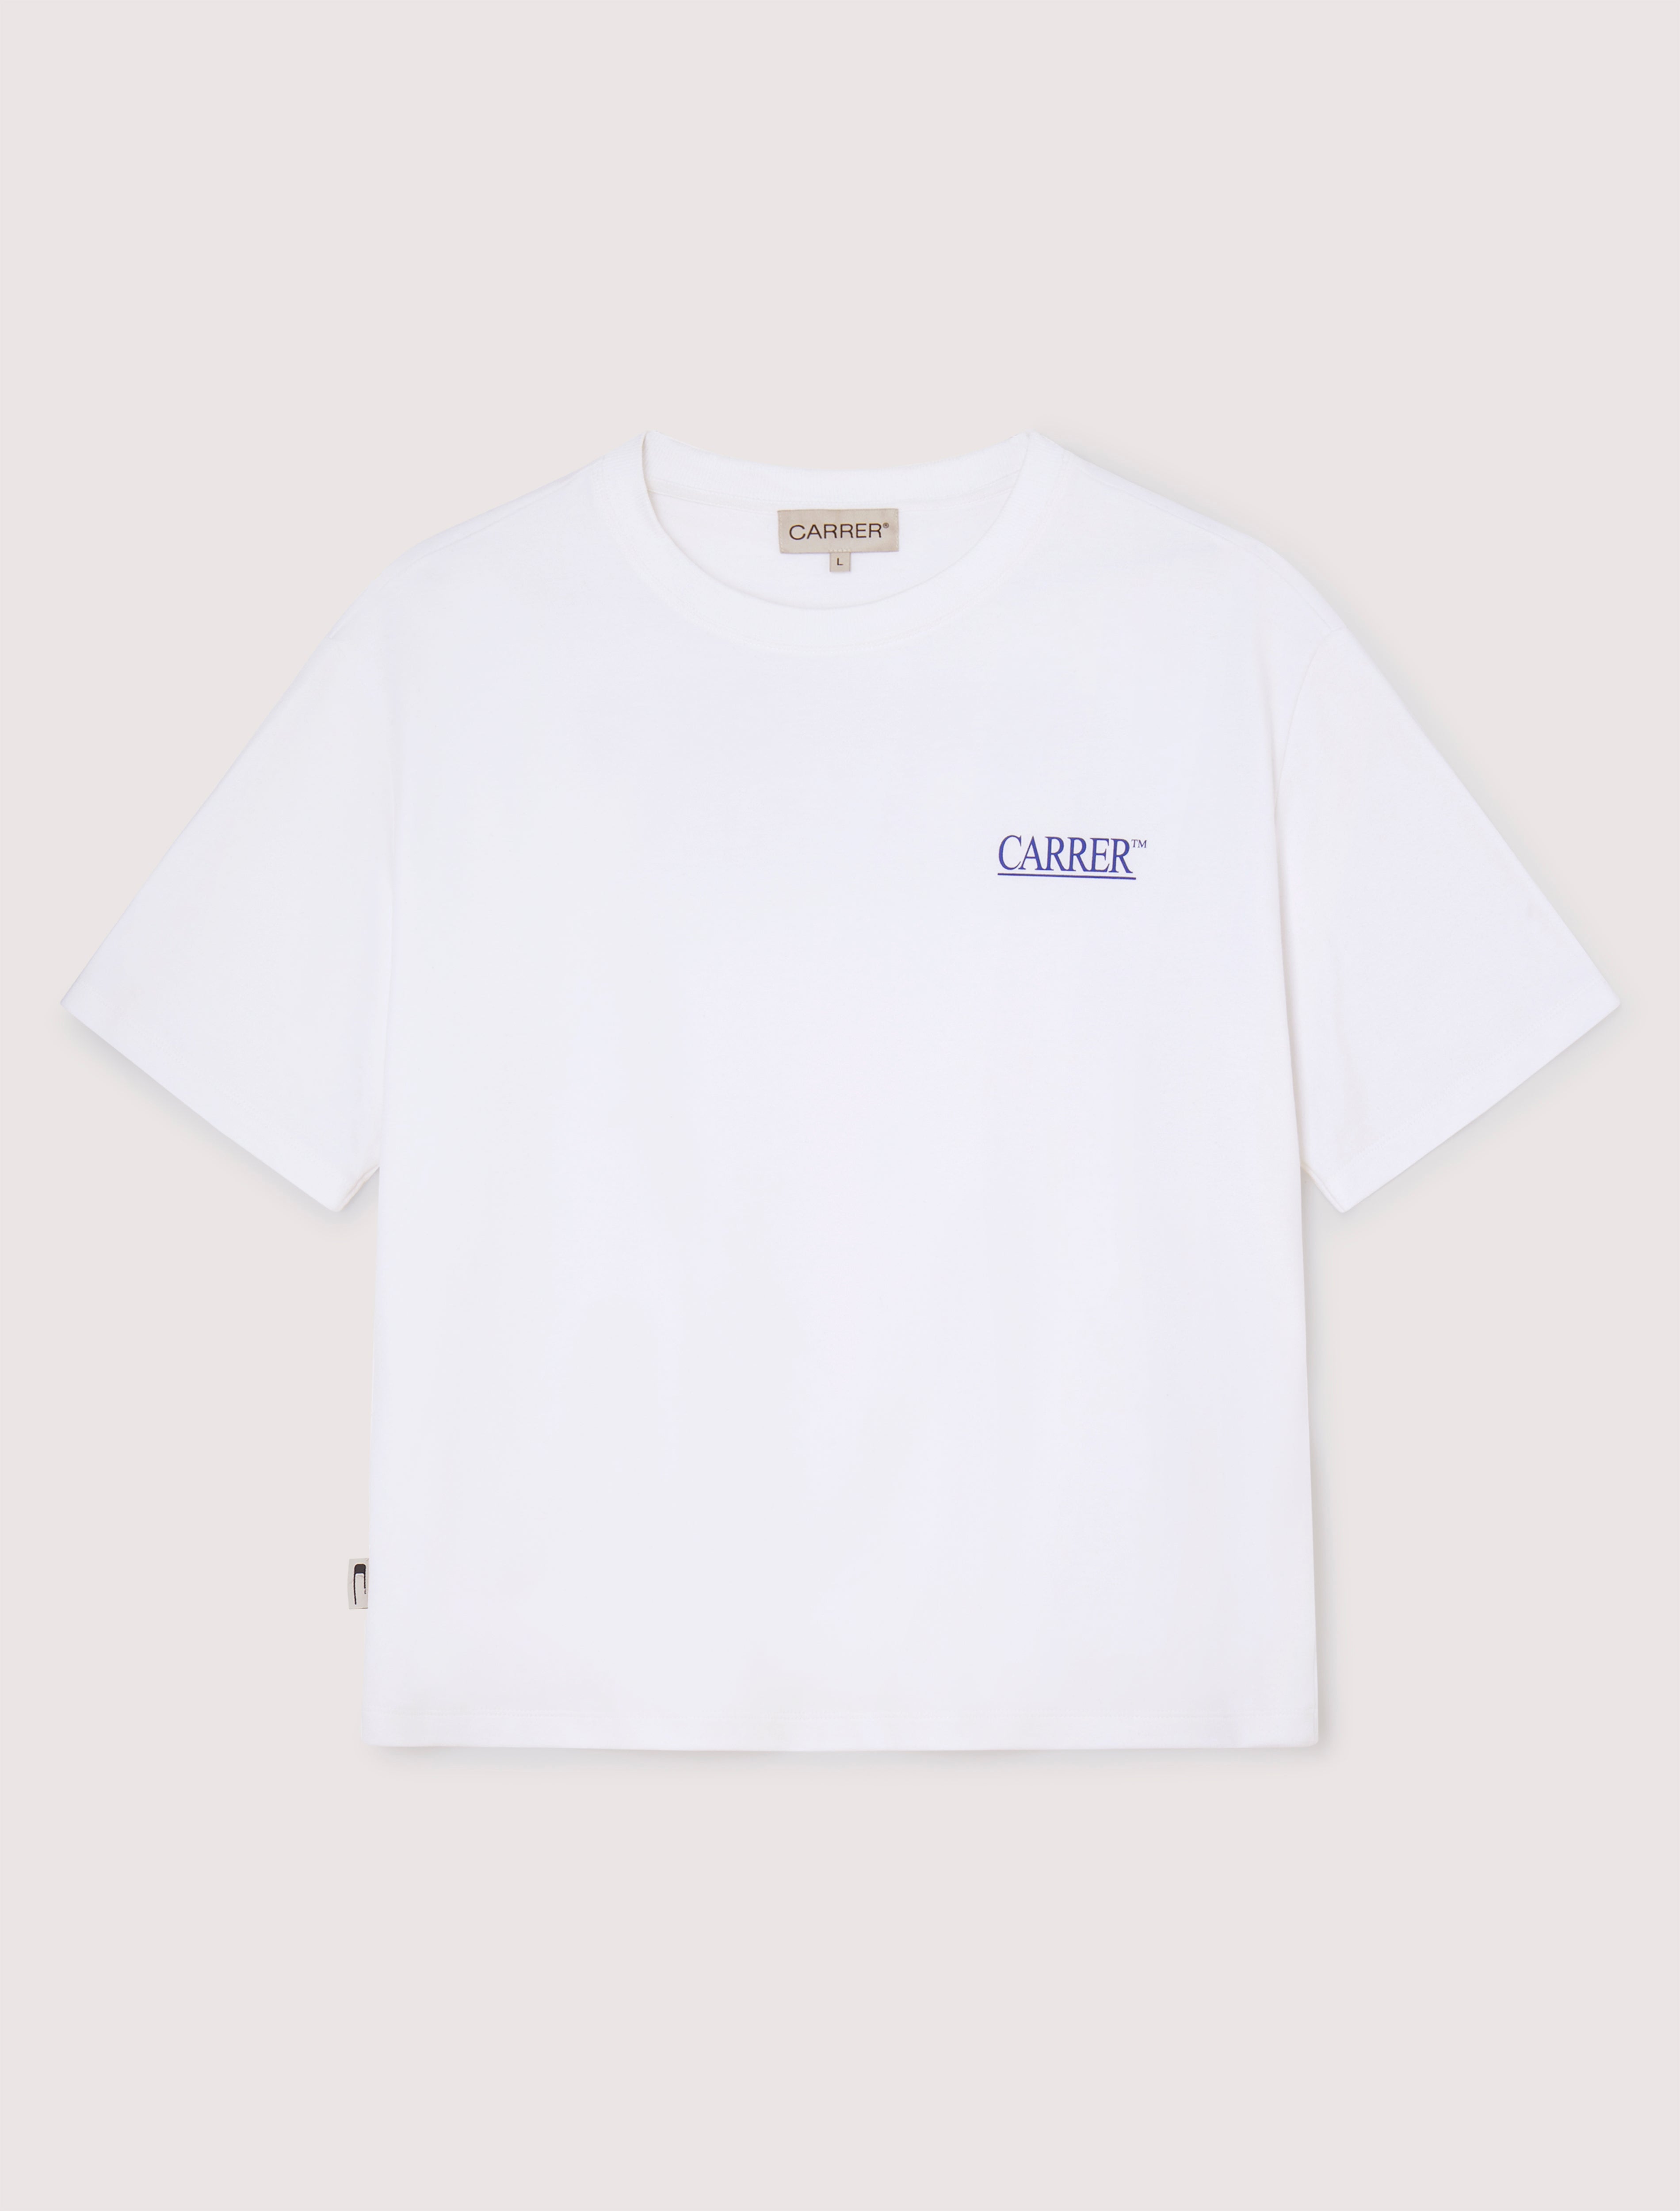 CARRER_CASP T-SHIRT IN WHITE